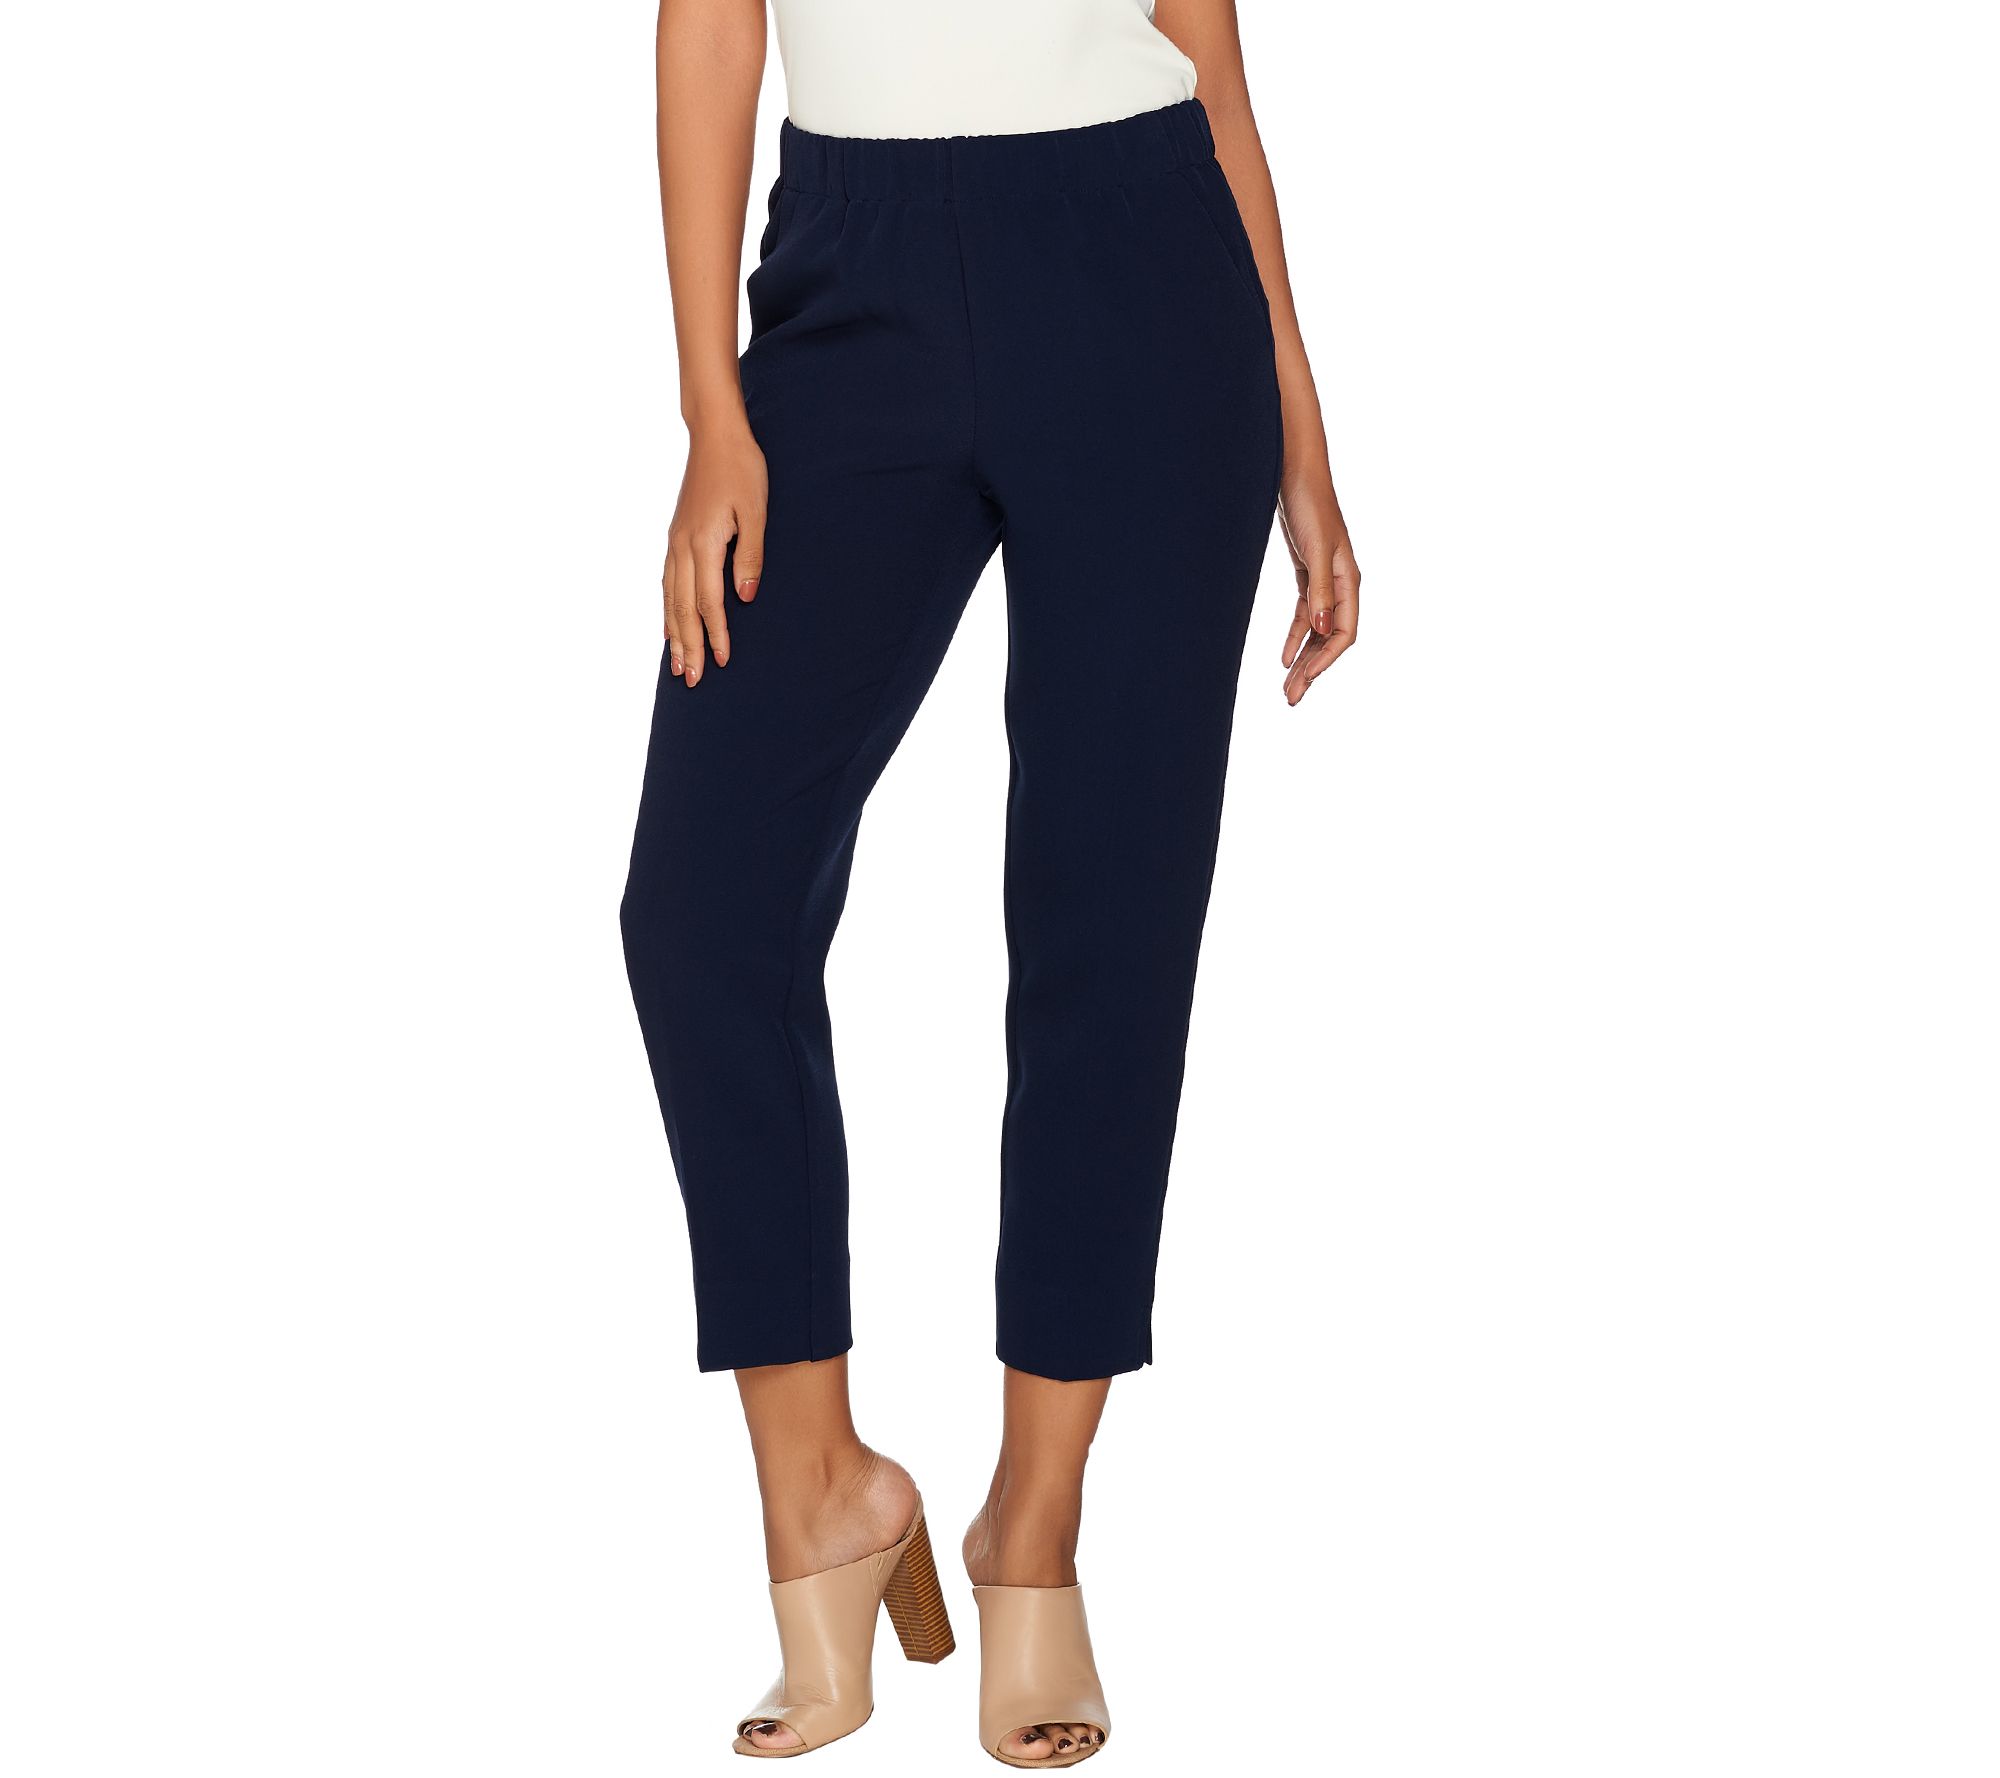 Dennis Basso Textured Pull-On Crop Pants - QVC.com